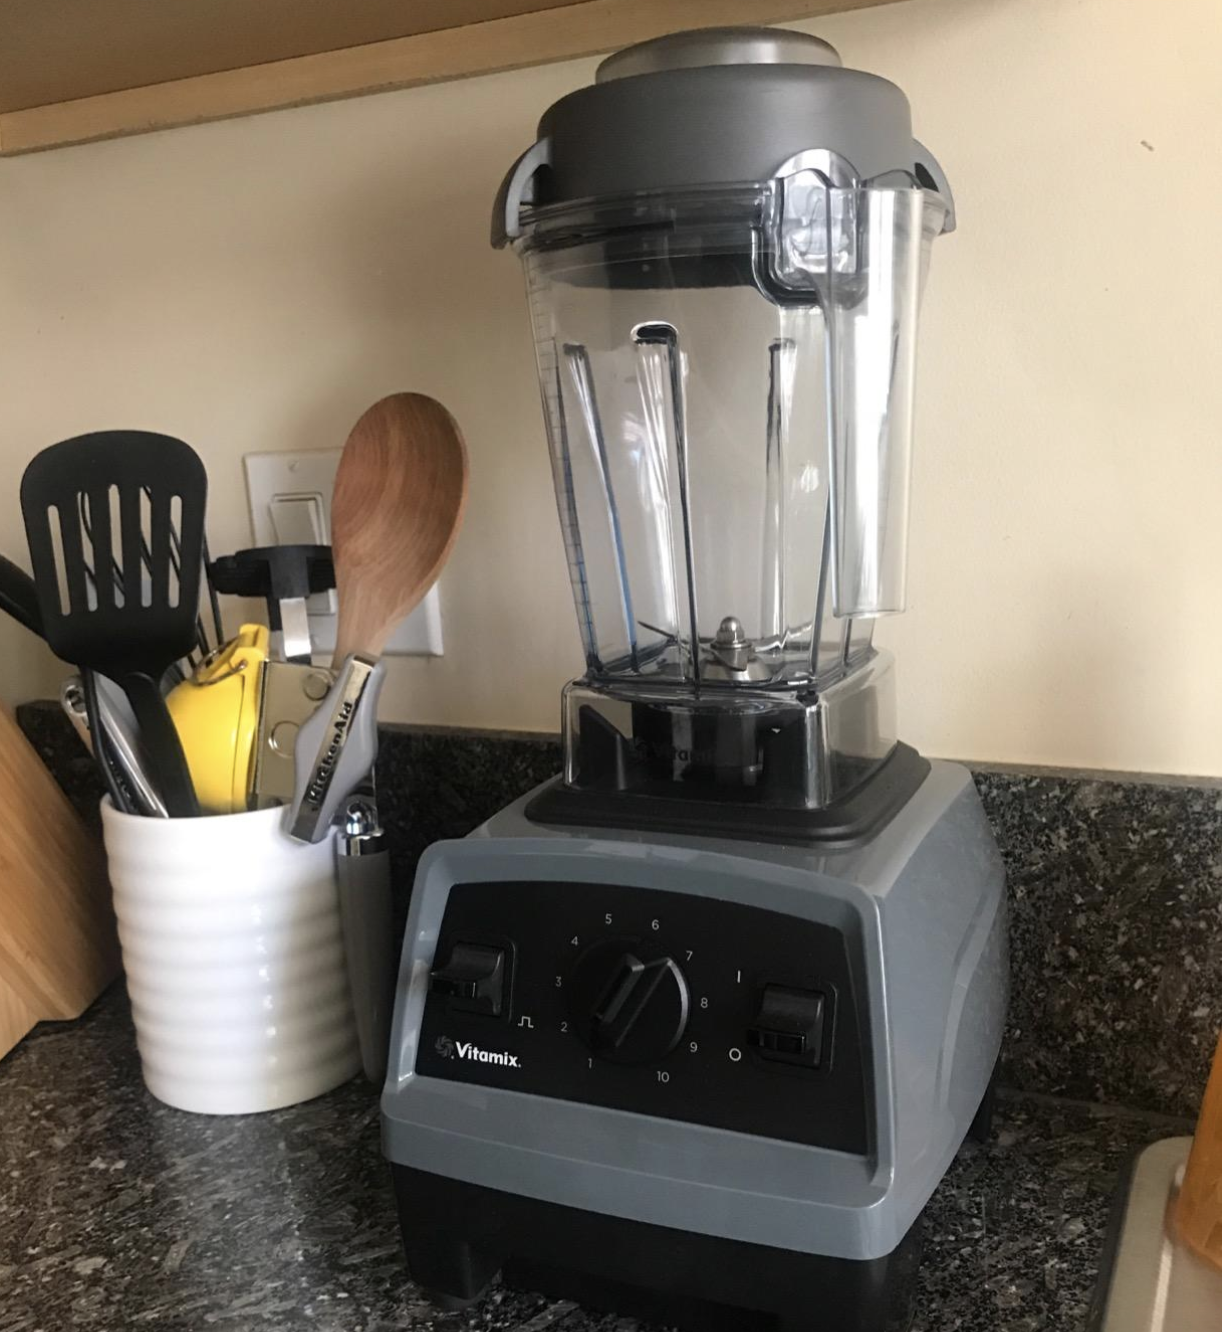 The Vitamix fitting under a kitchen cabinet